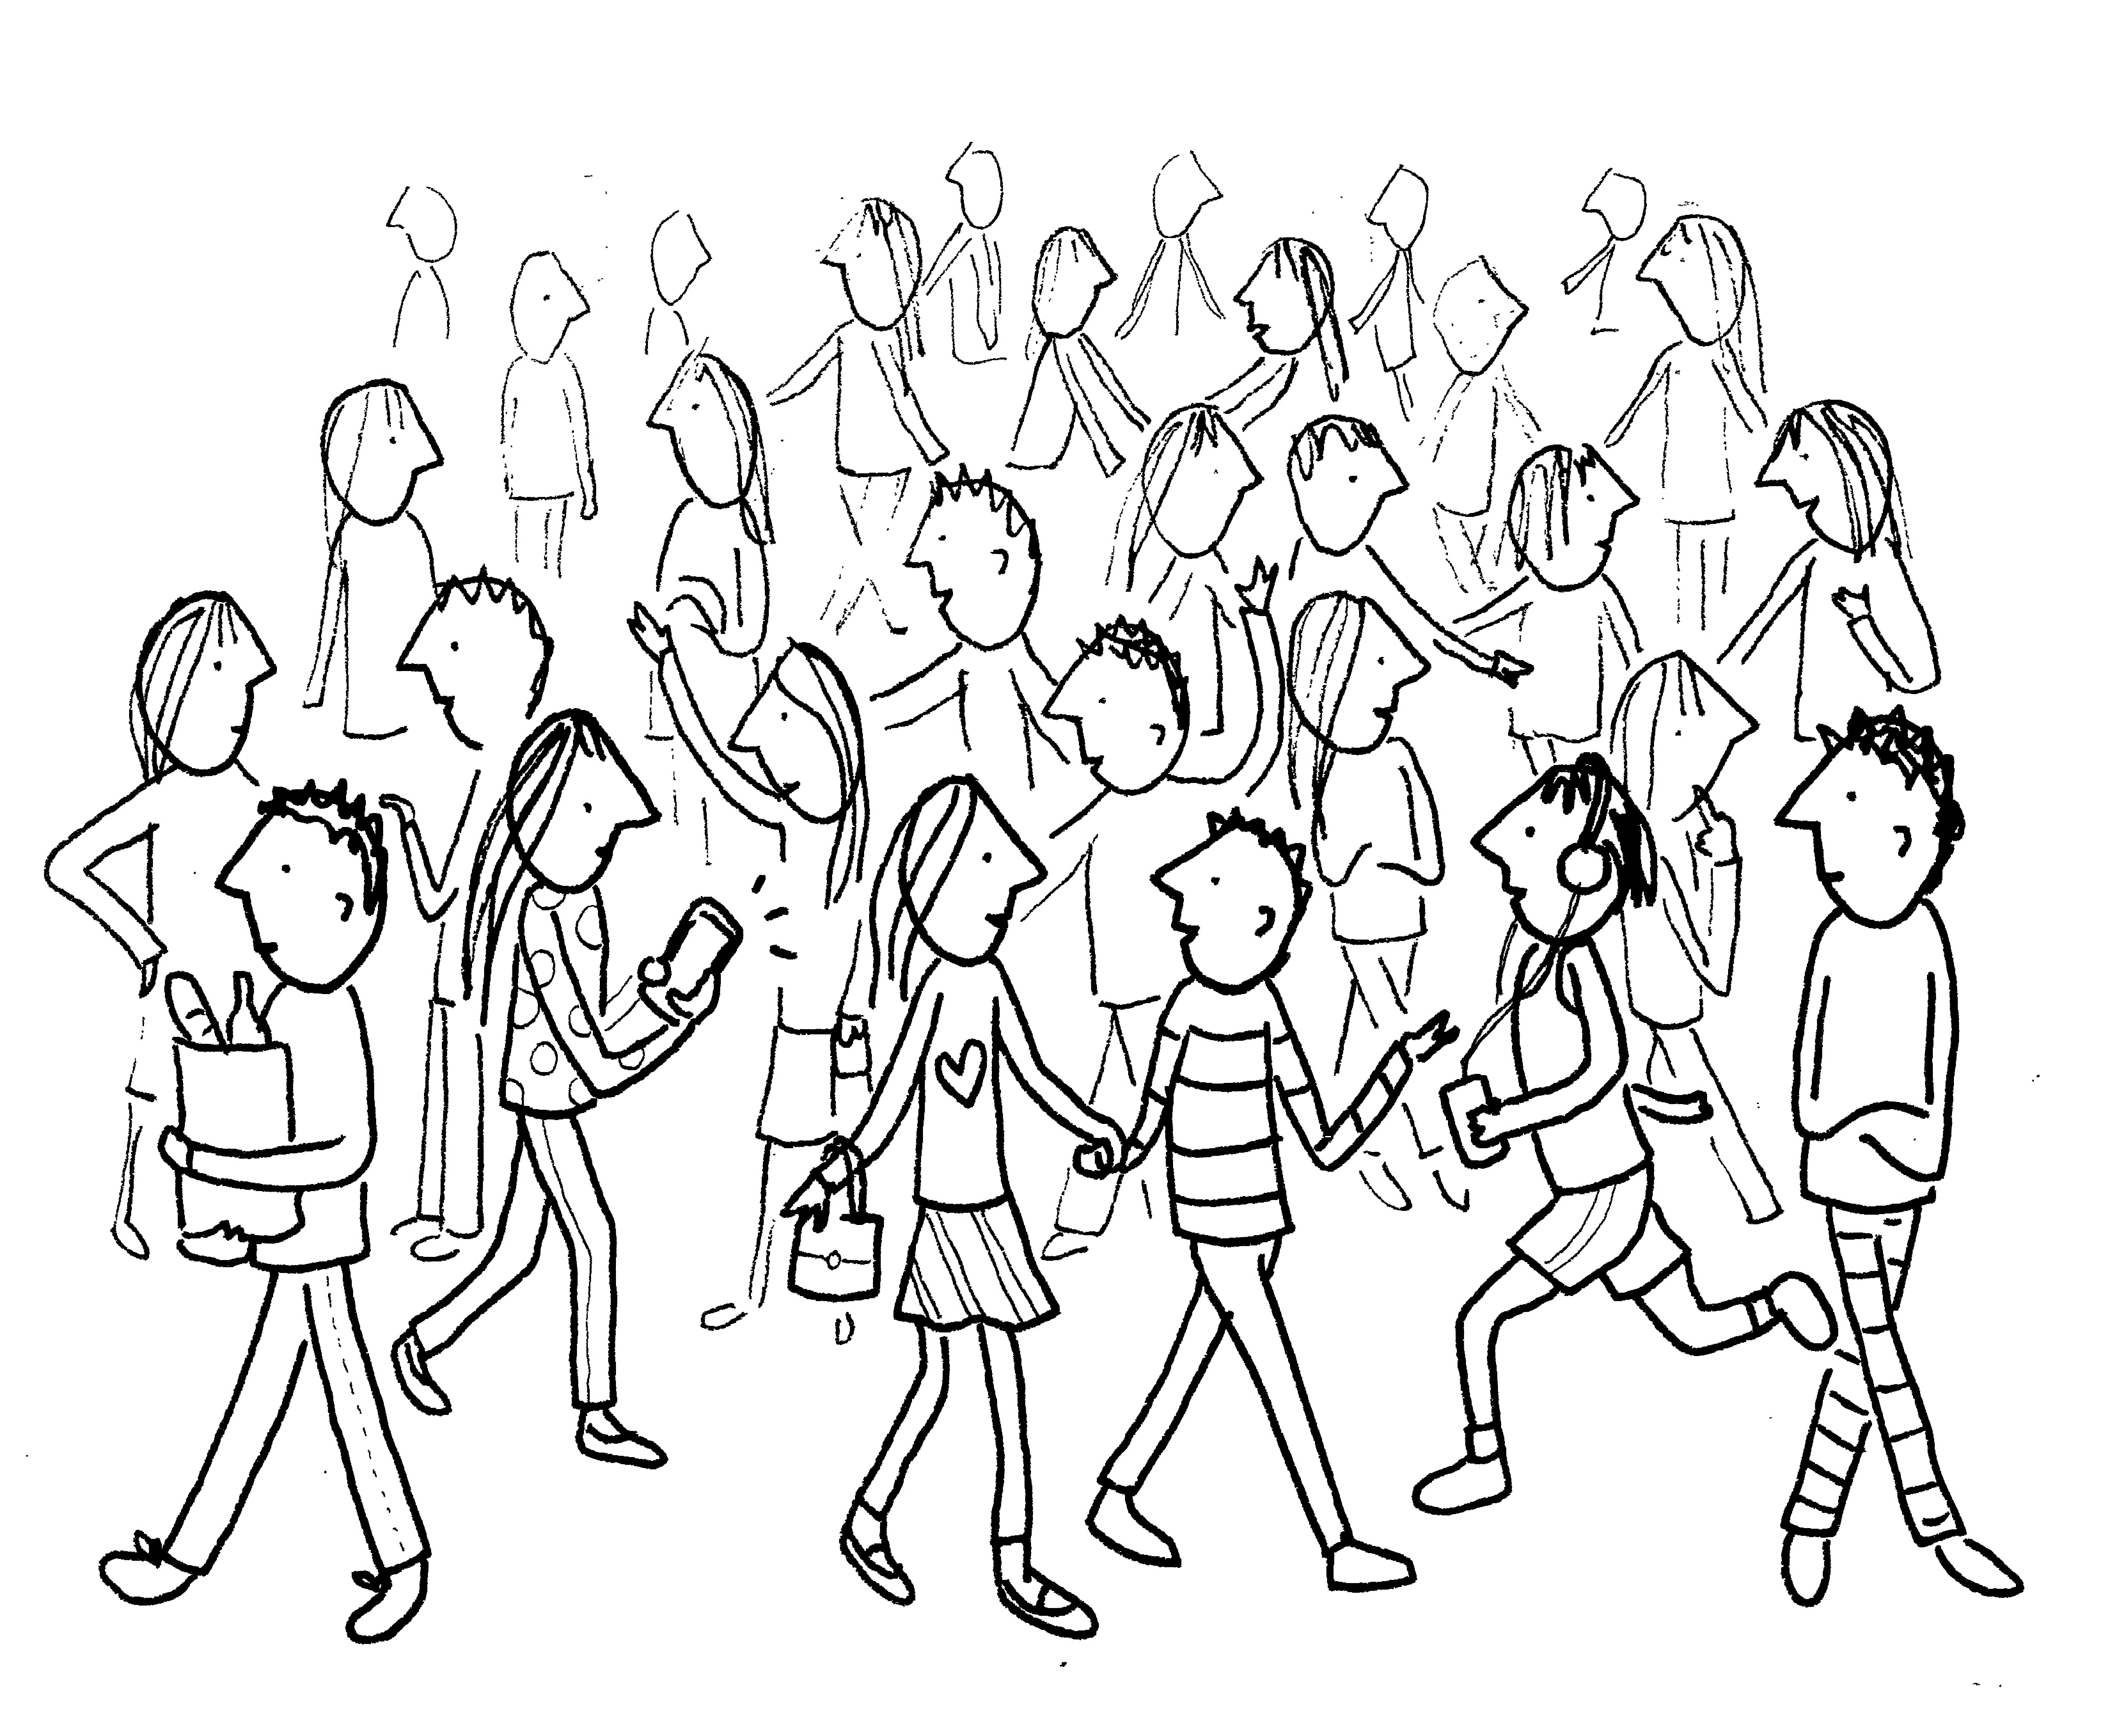 How To Draw A Big Crowd Of People imgfuzz